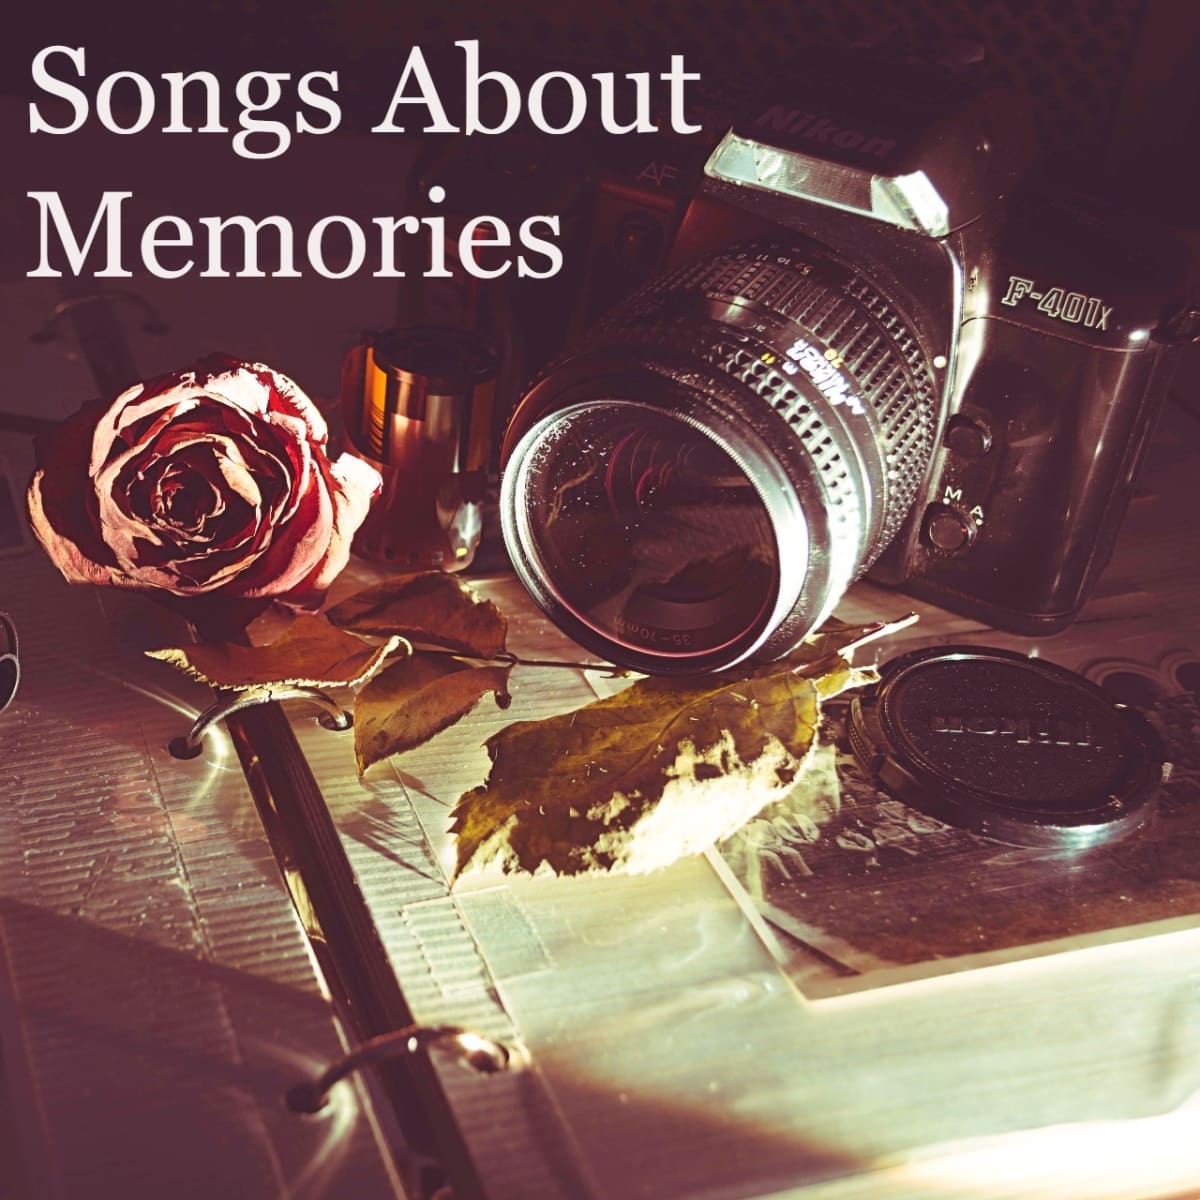 109 Songs About Memories - Spinditty